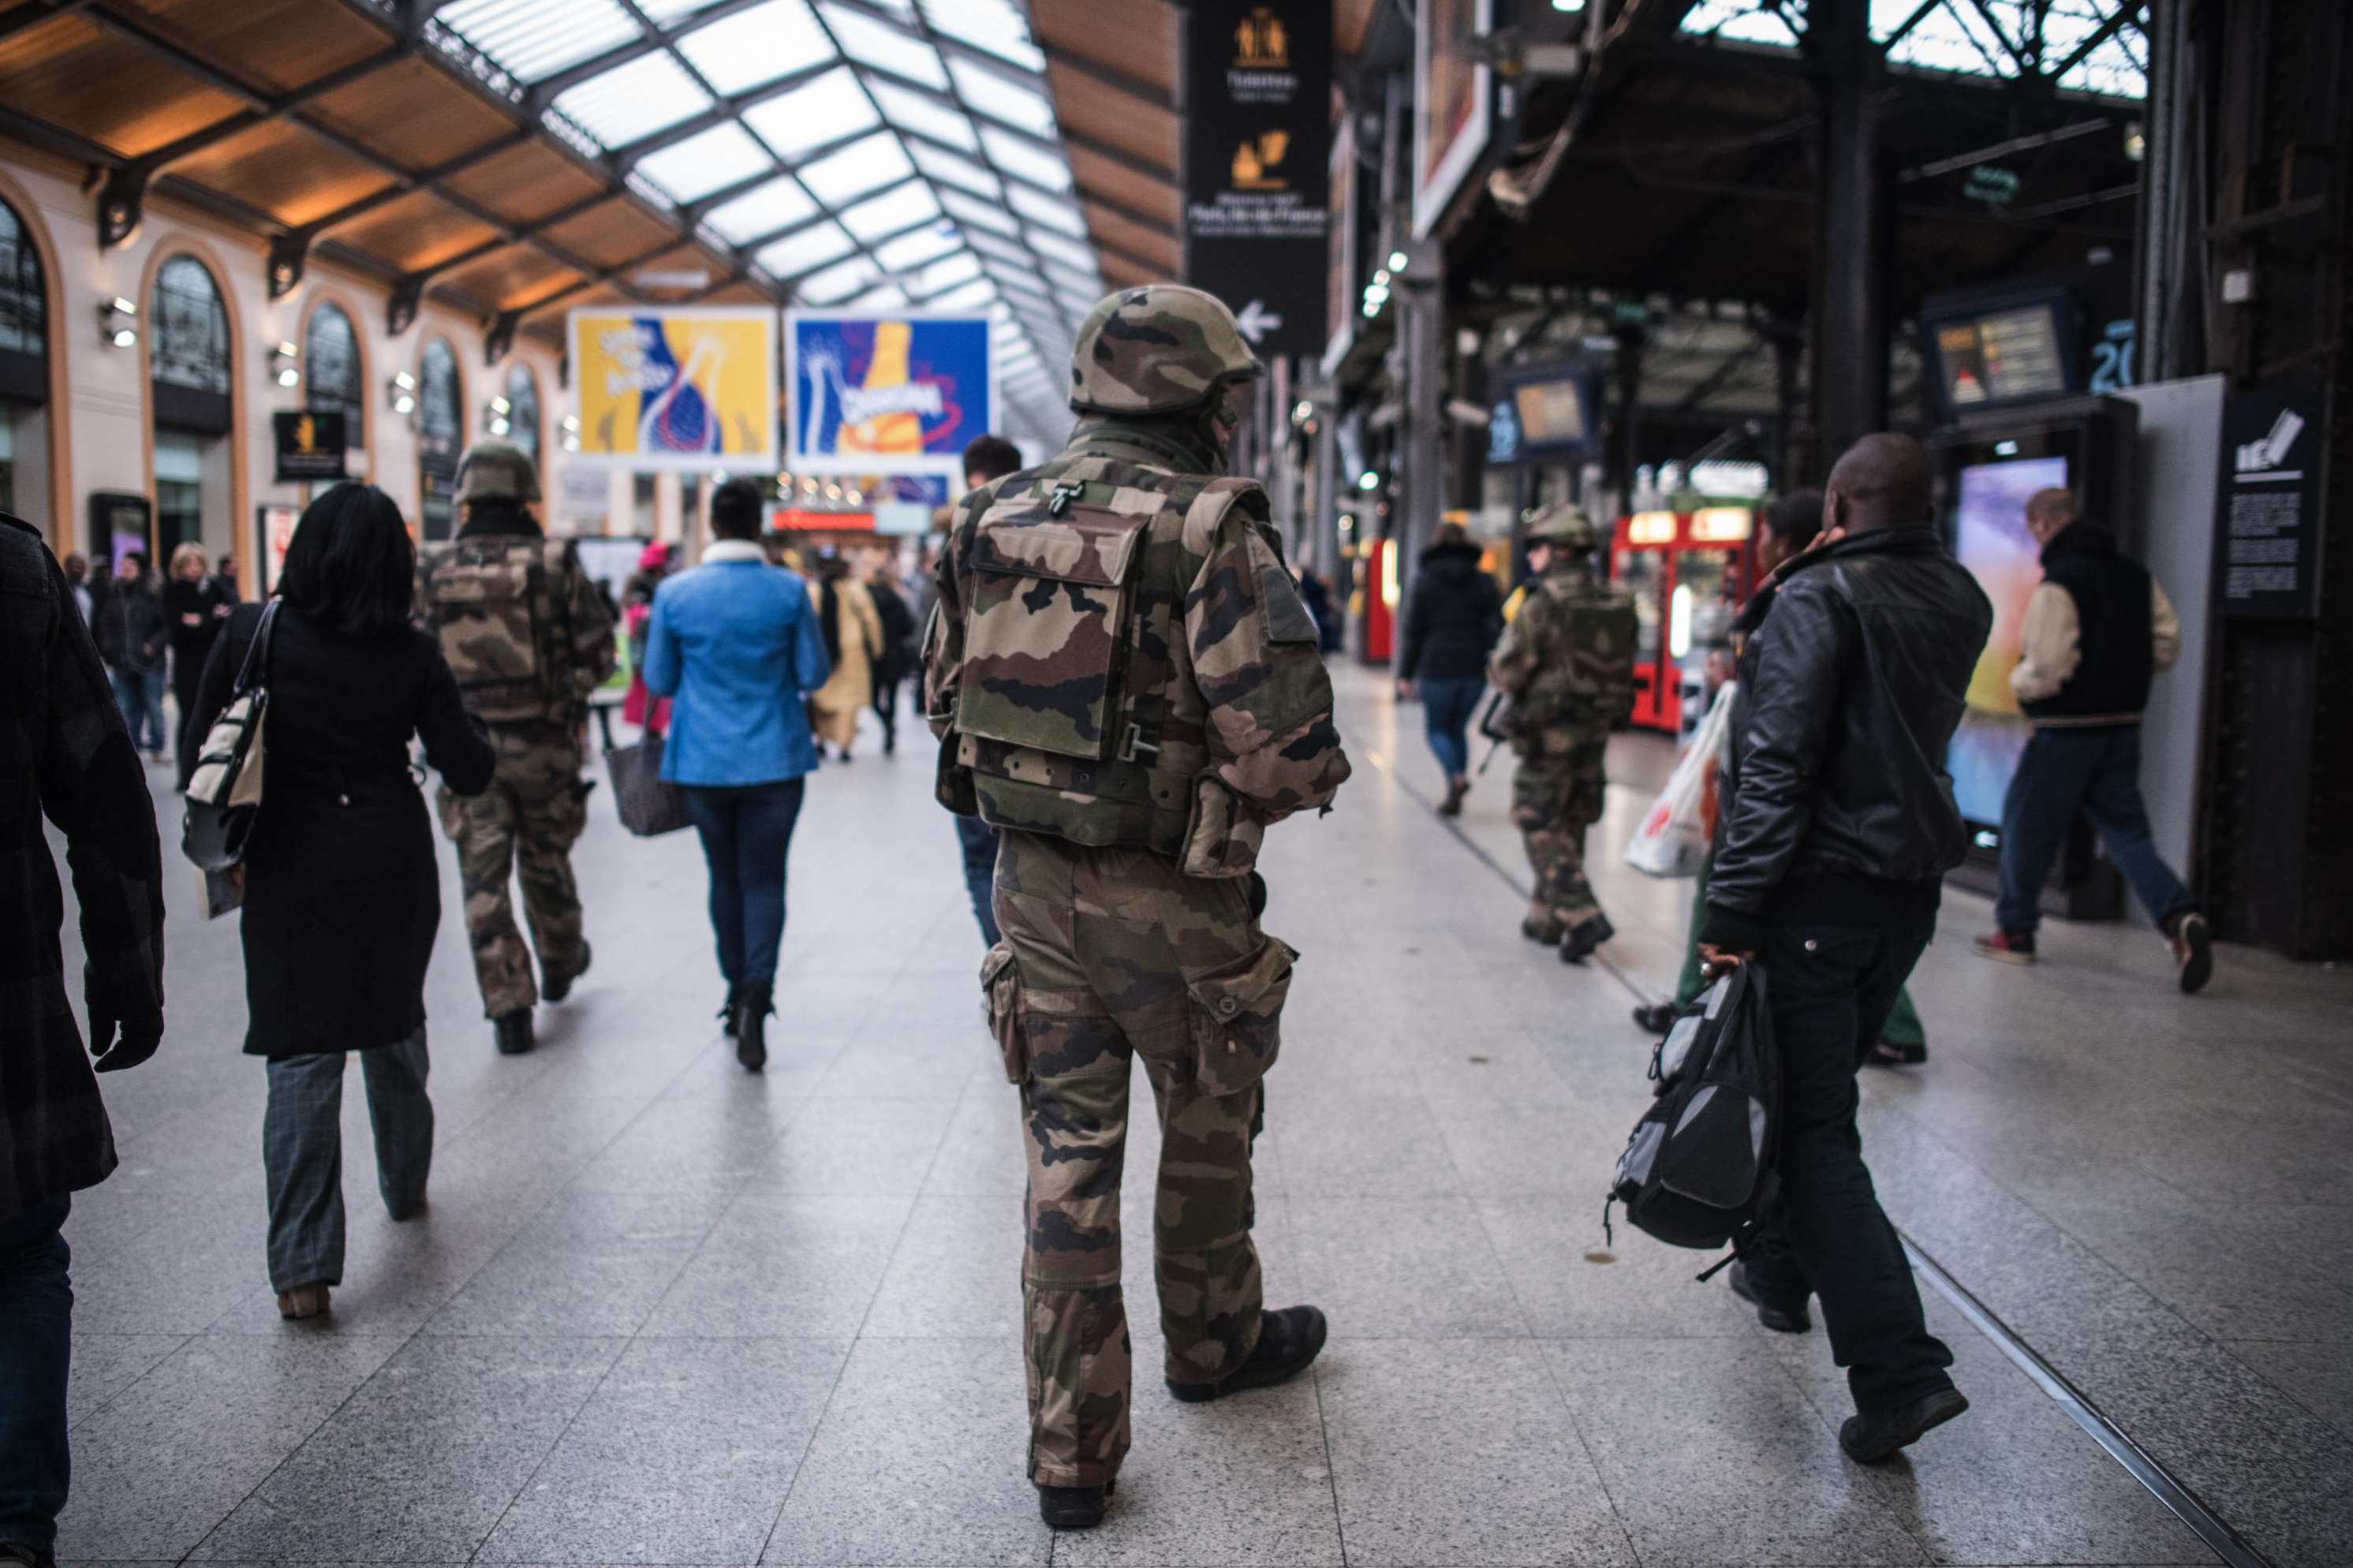 A French soldier patrols at Gare Saint Lazare train station in Paris, Saturday, Nov. 15, 2015. French President Francois Hollande vowed to attack Islamic State without mercy as the jihadist group admitted responsibility Saturday for orchestrating the deadliest attacks inflicted on France since World War II. (AP Photo/Kamil Zihnioglu)/ZIH102/225136091837/1511141246